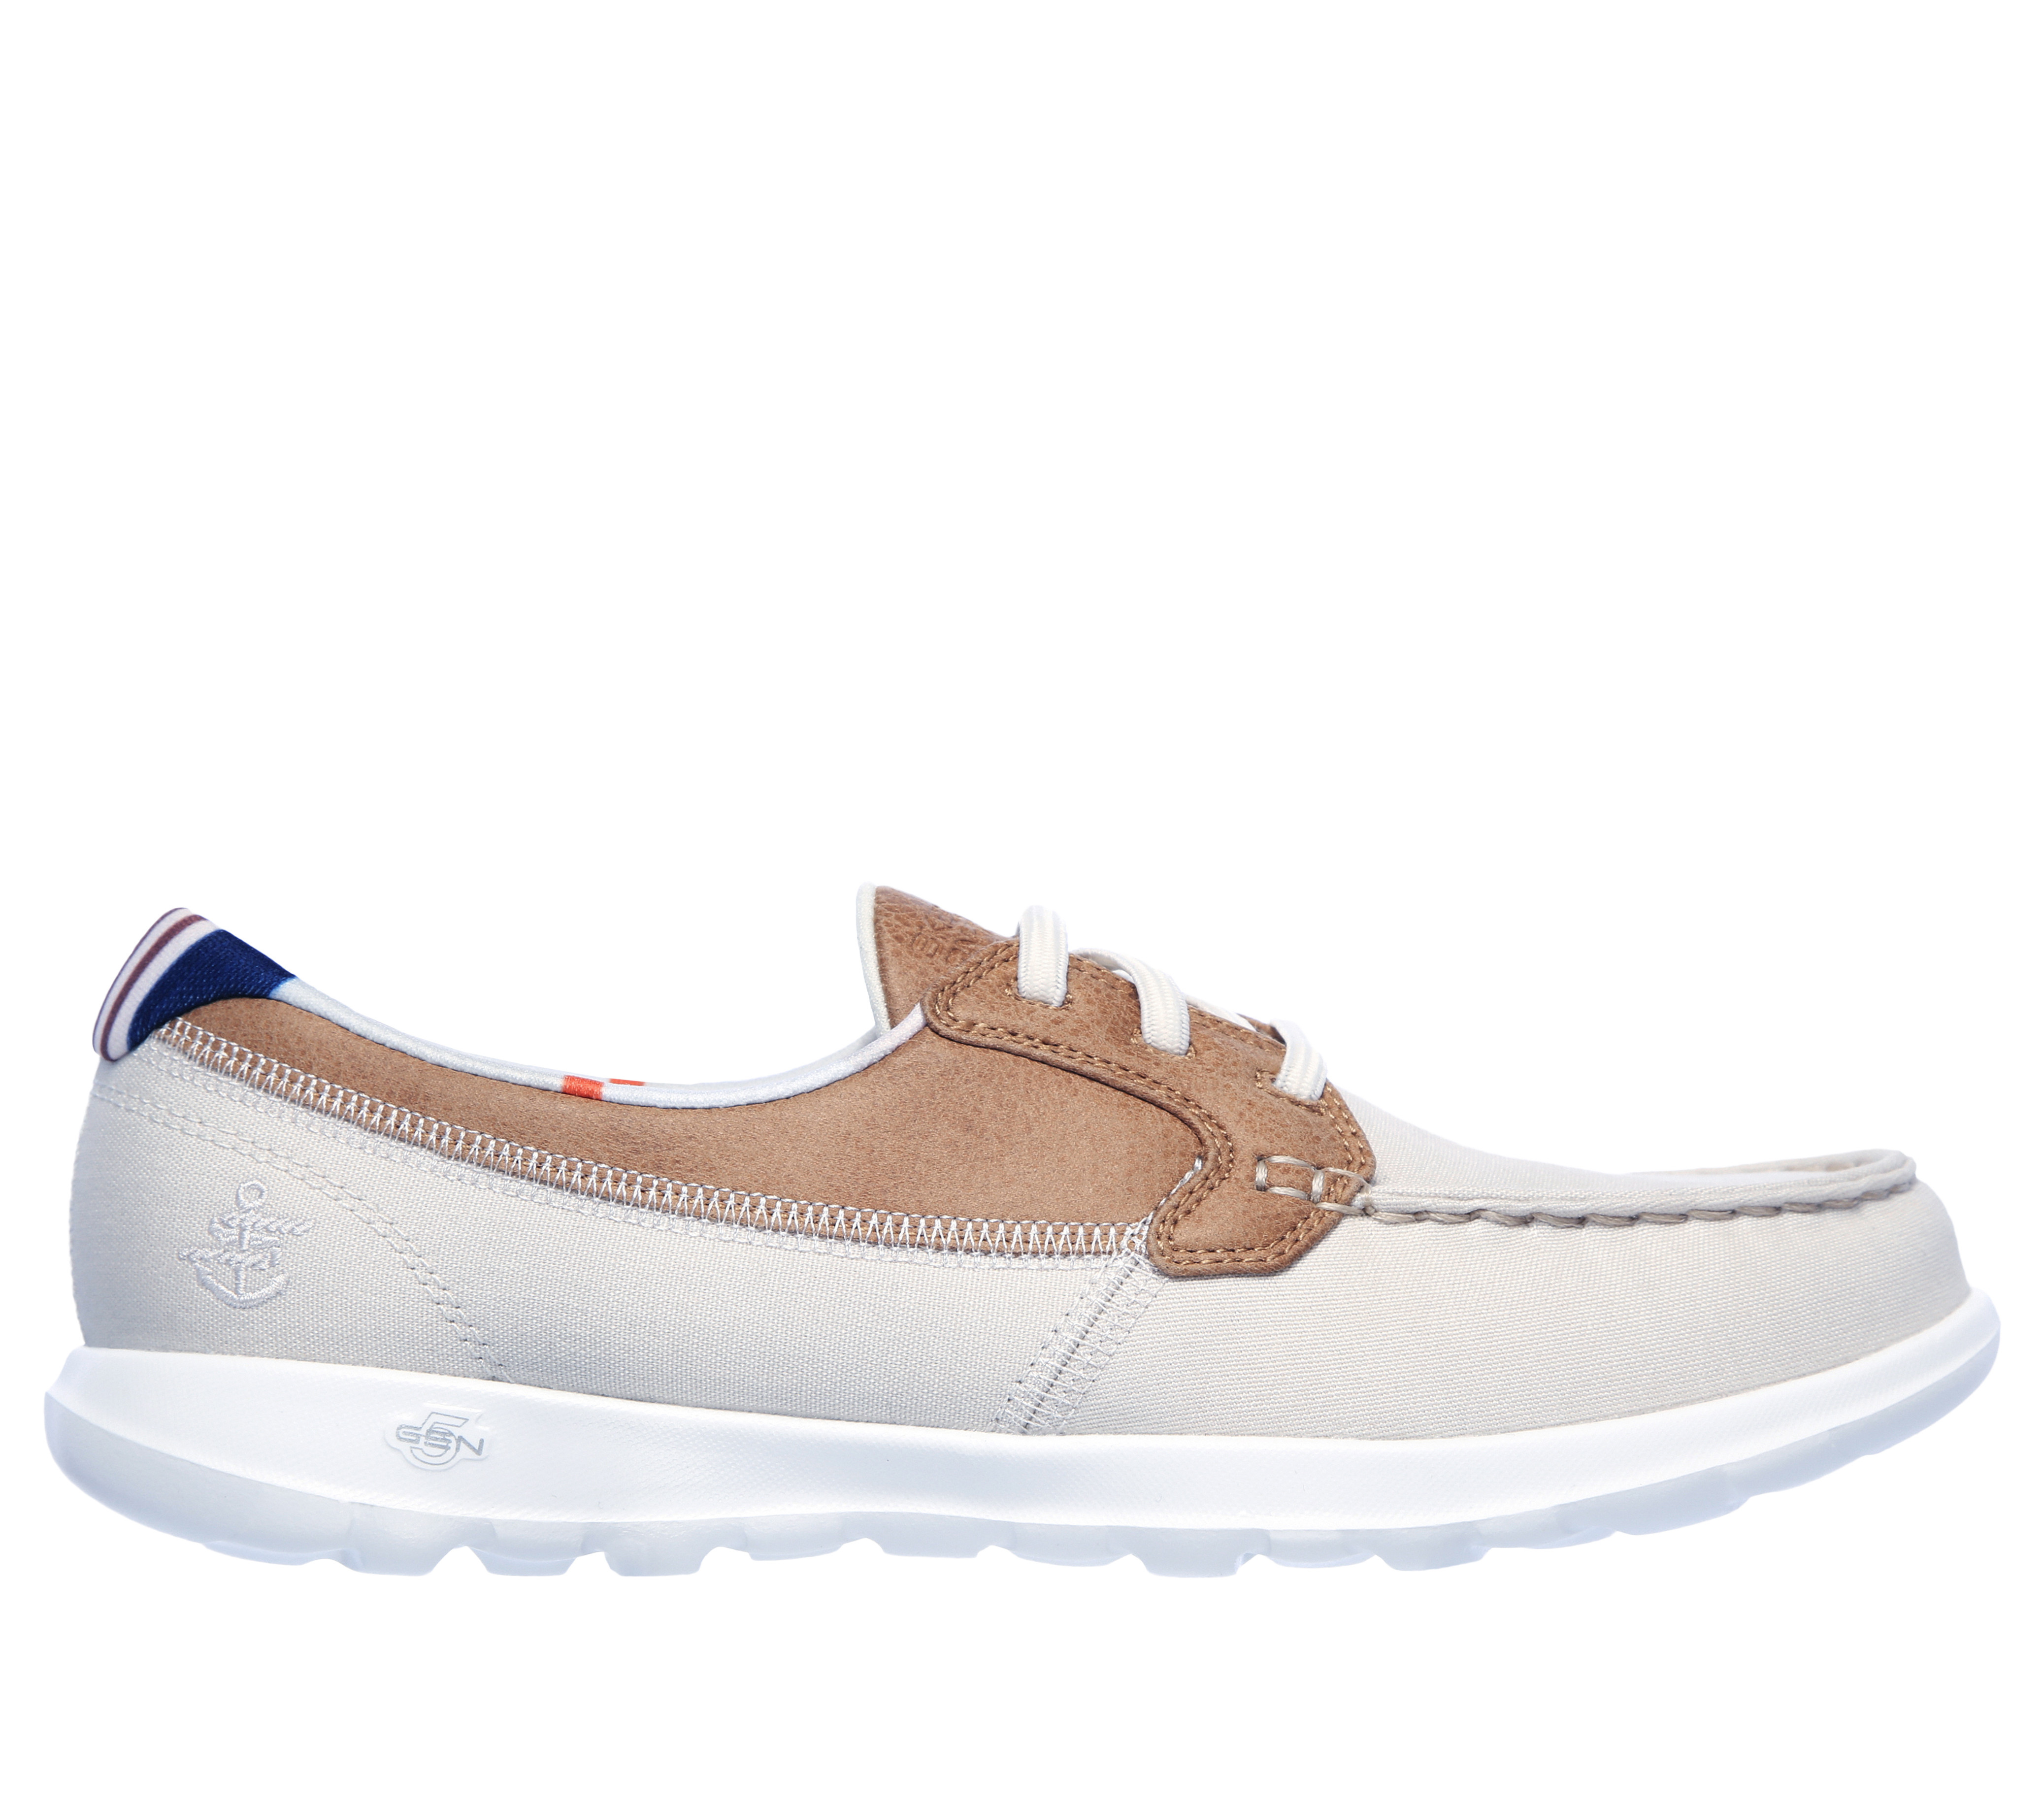 skechers on the go boat shoes with goga mat